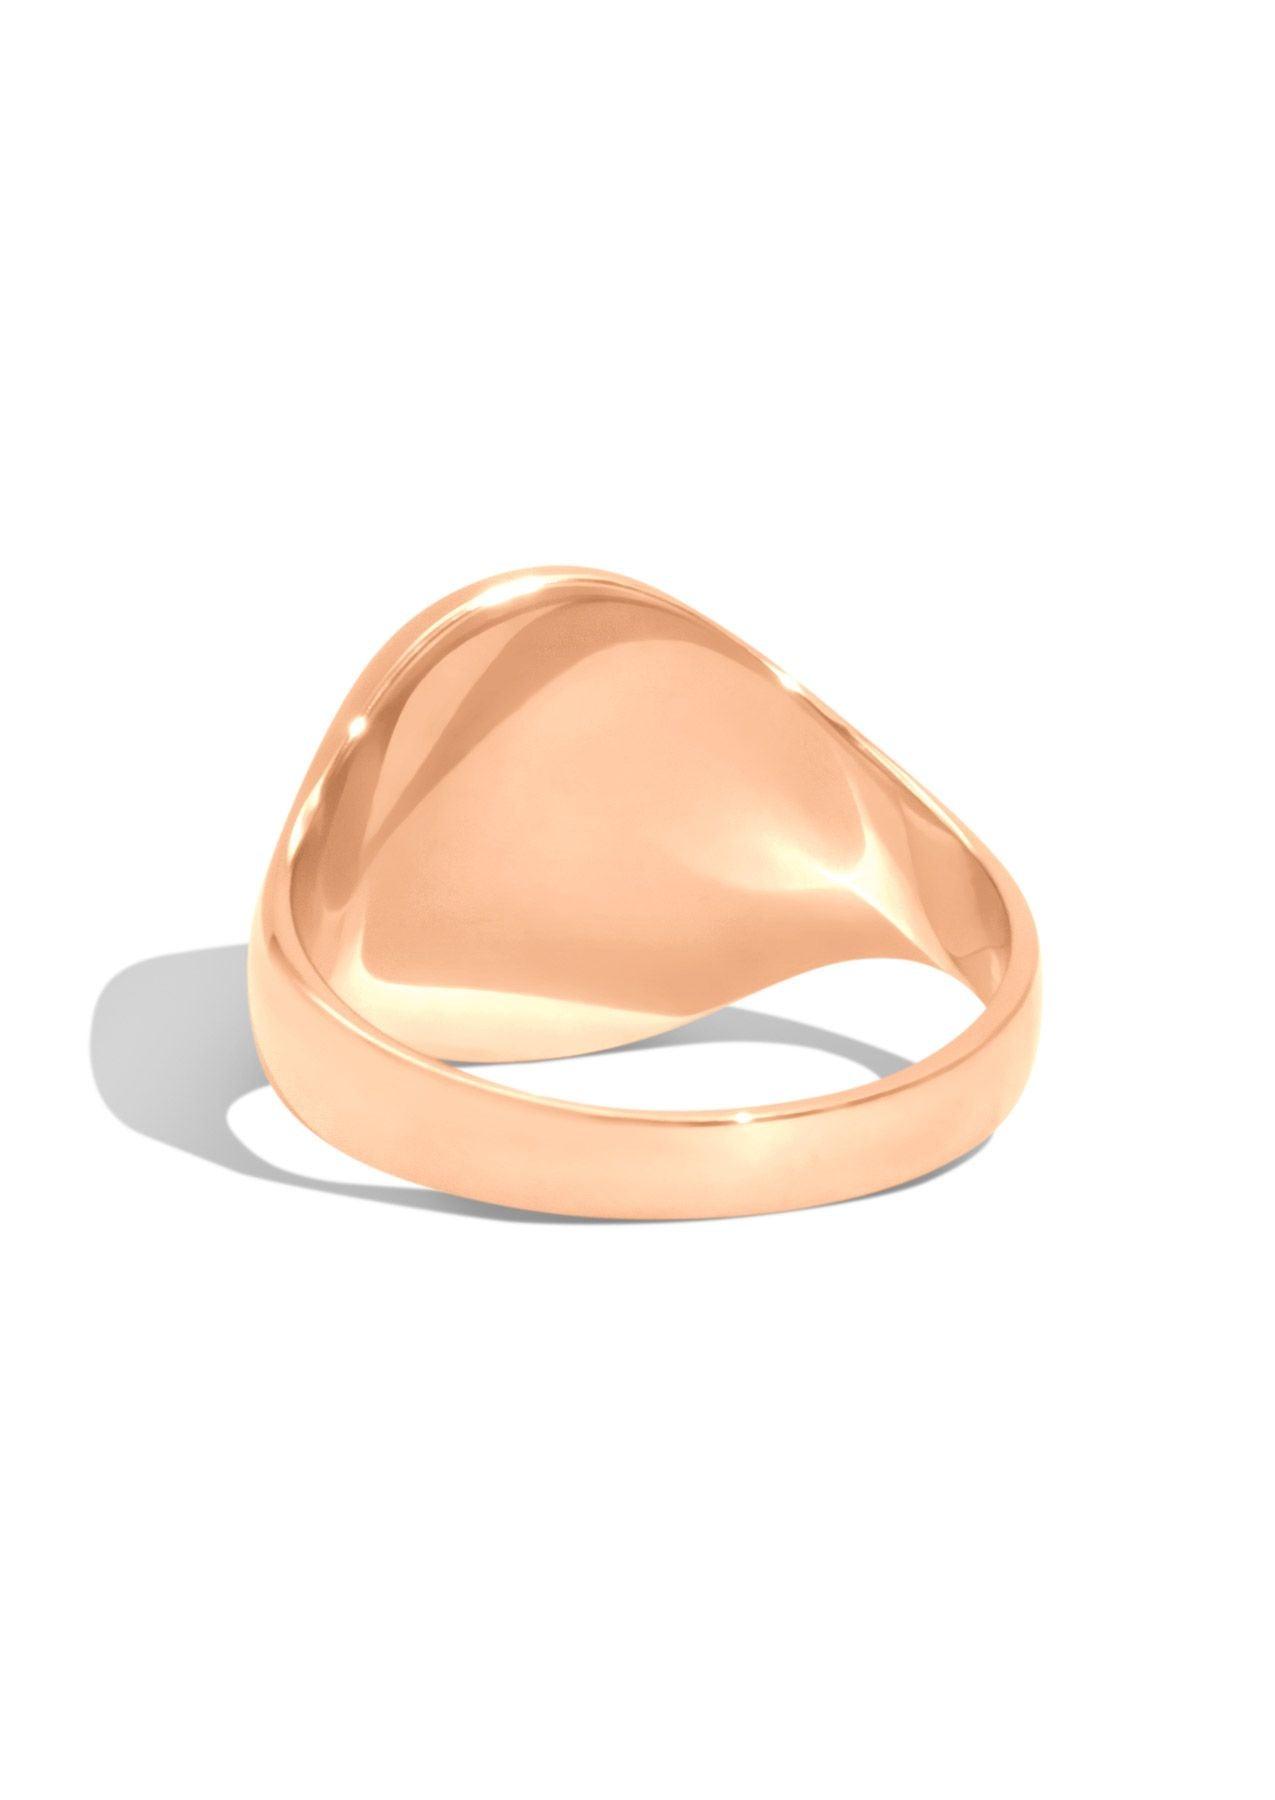 The Eclipse Rose Gold Signet Ring - Molten Store